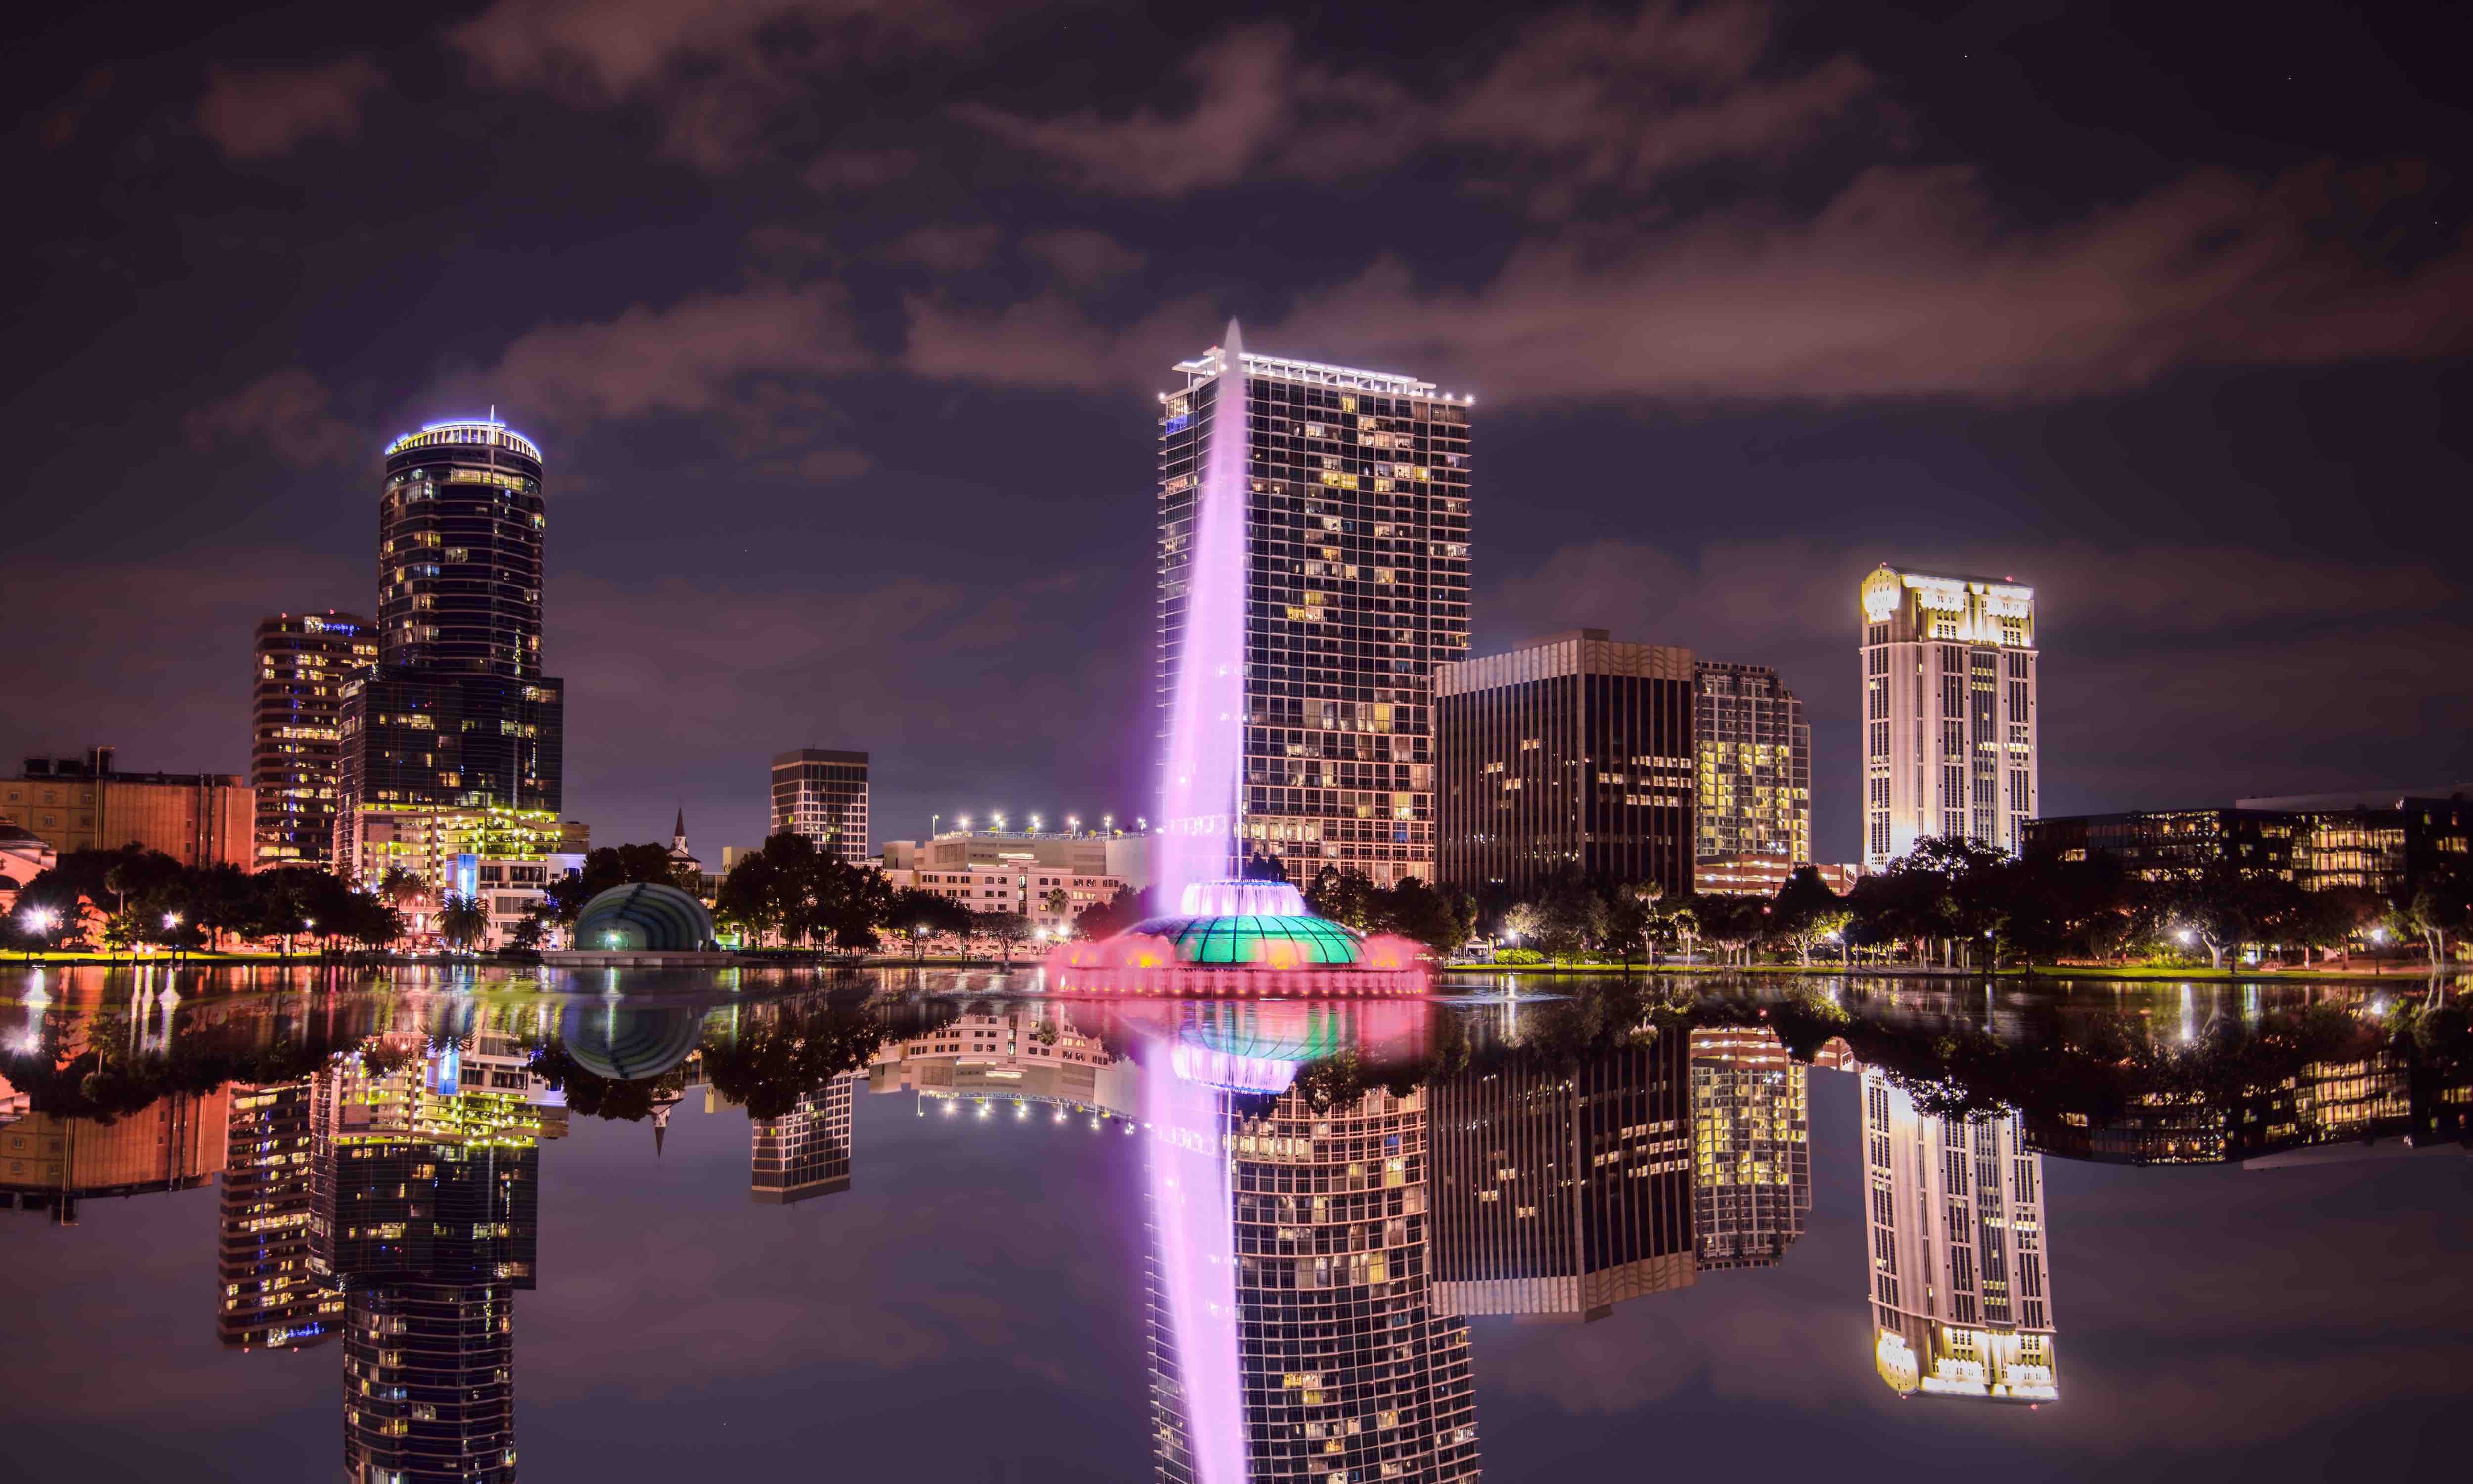 Orlando’s tourism industry has taken a hit during the pandemic, but its jobs and real estate markets have proven resilient. (Credit: Getty Images)